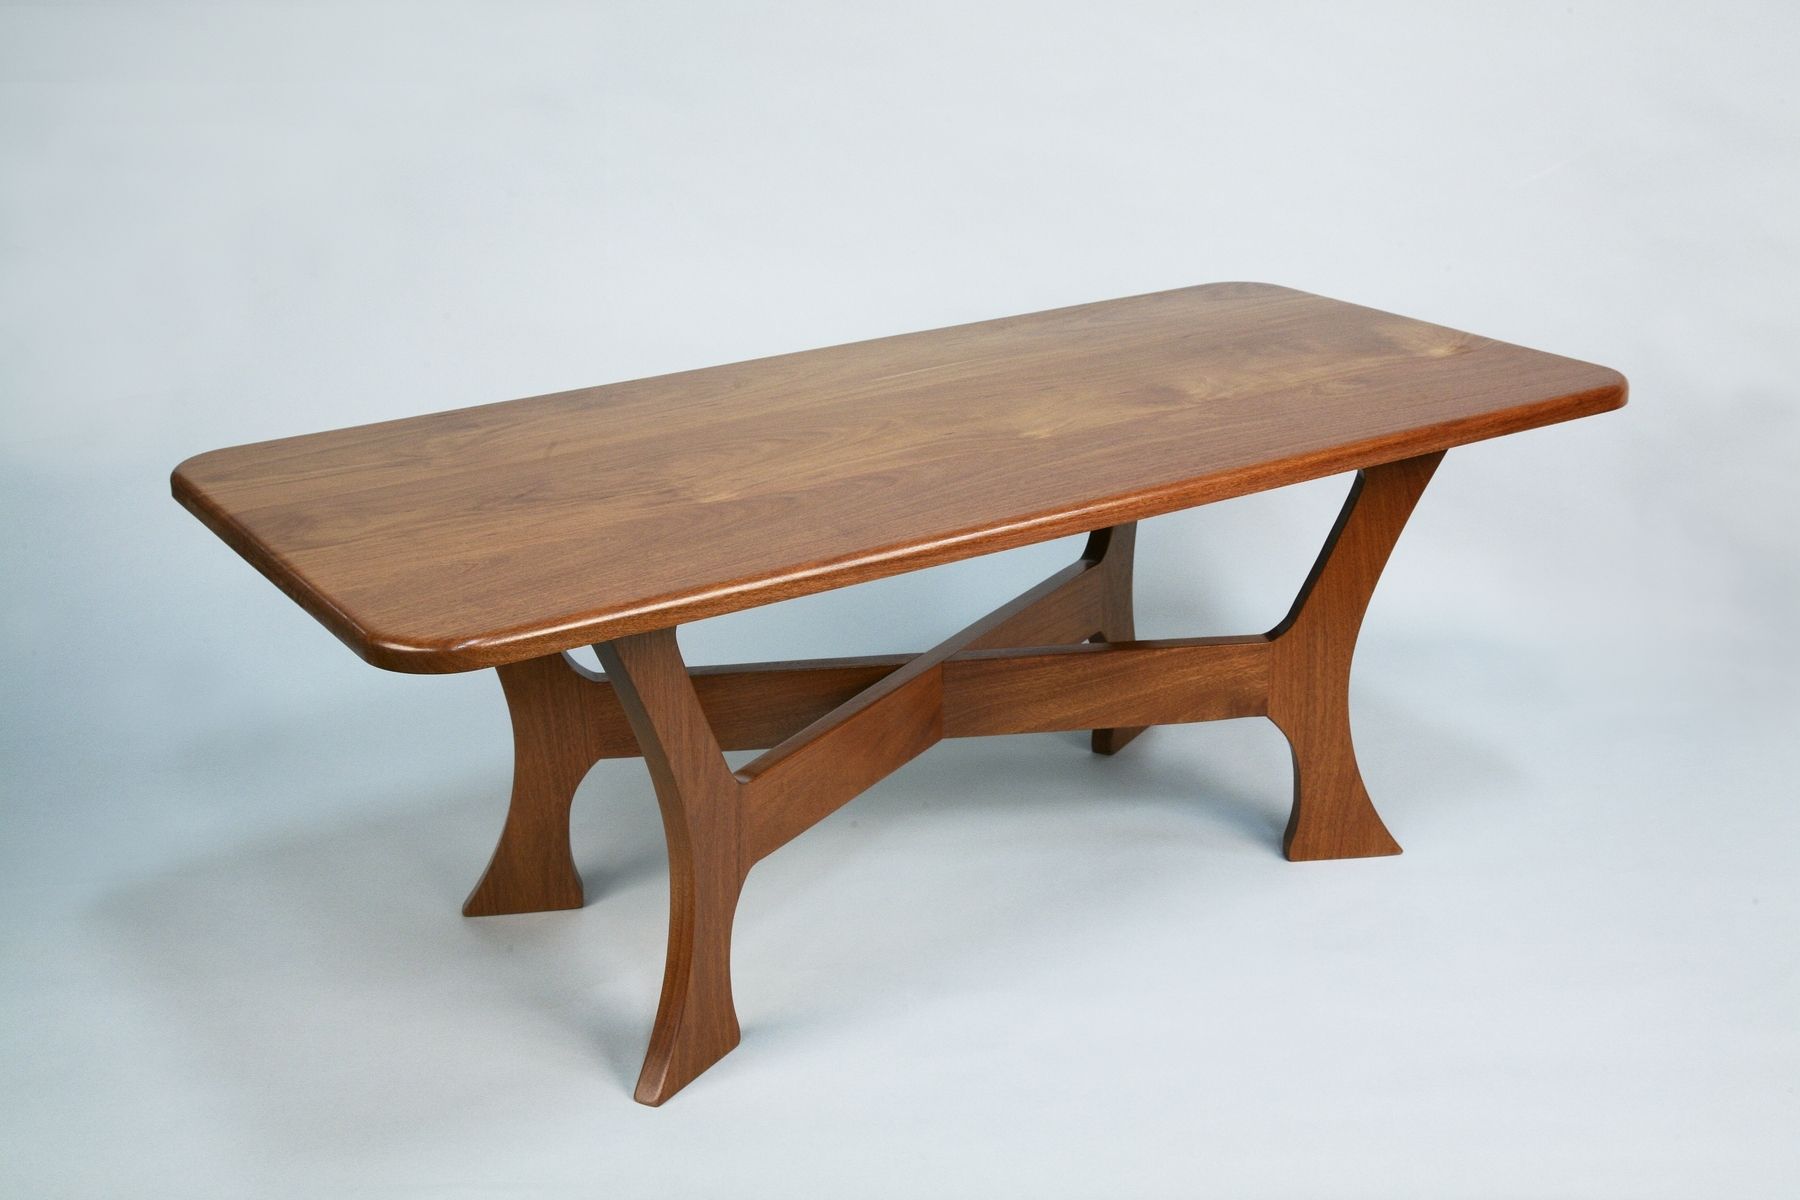 Handmade Simple Coffee Table by Hurst Concepts, LLC | CustomMade.com